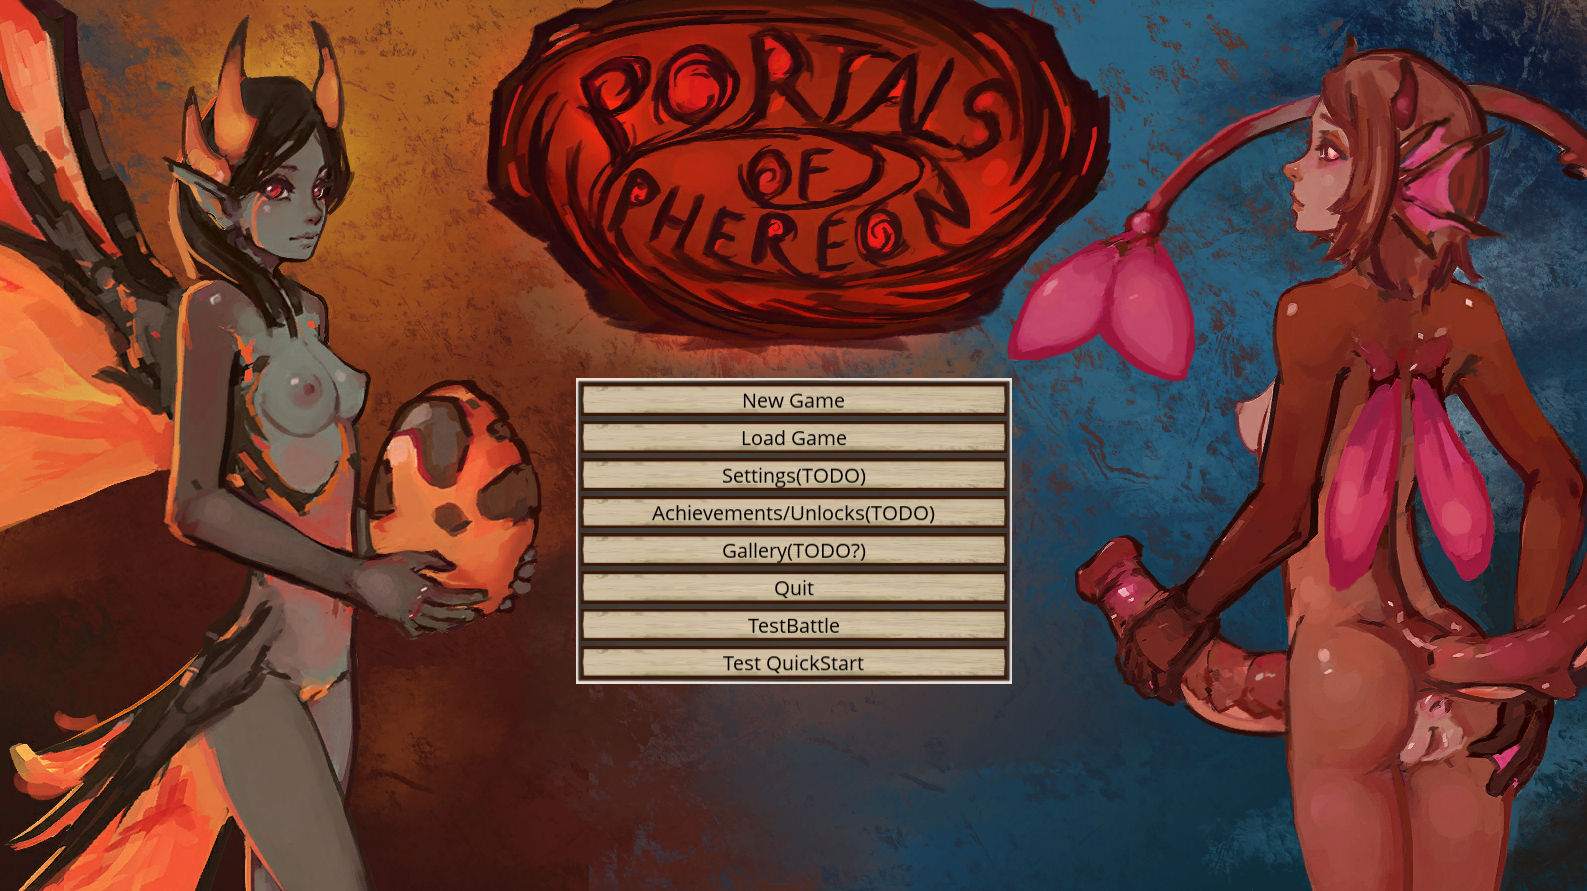 Portals of Phereon v0.21.0.1 by Syvaron Win/Linux